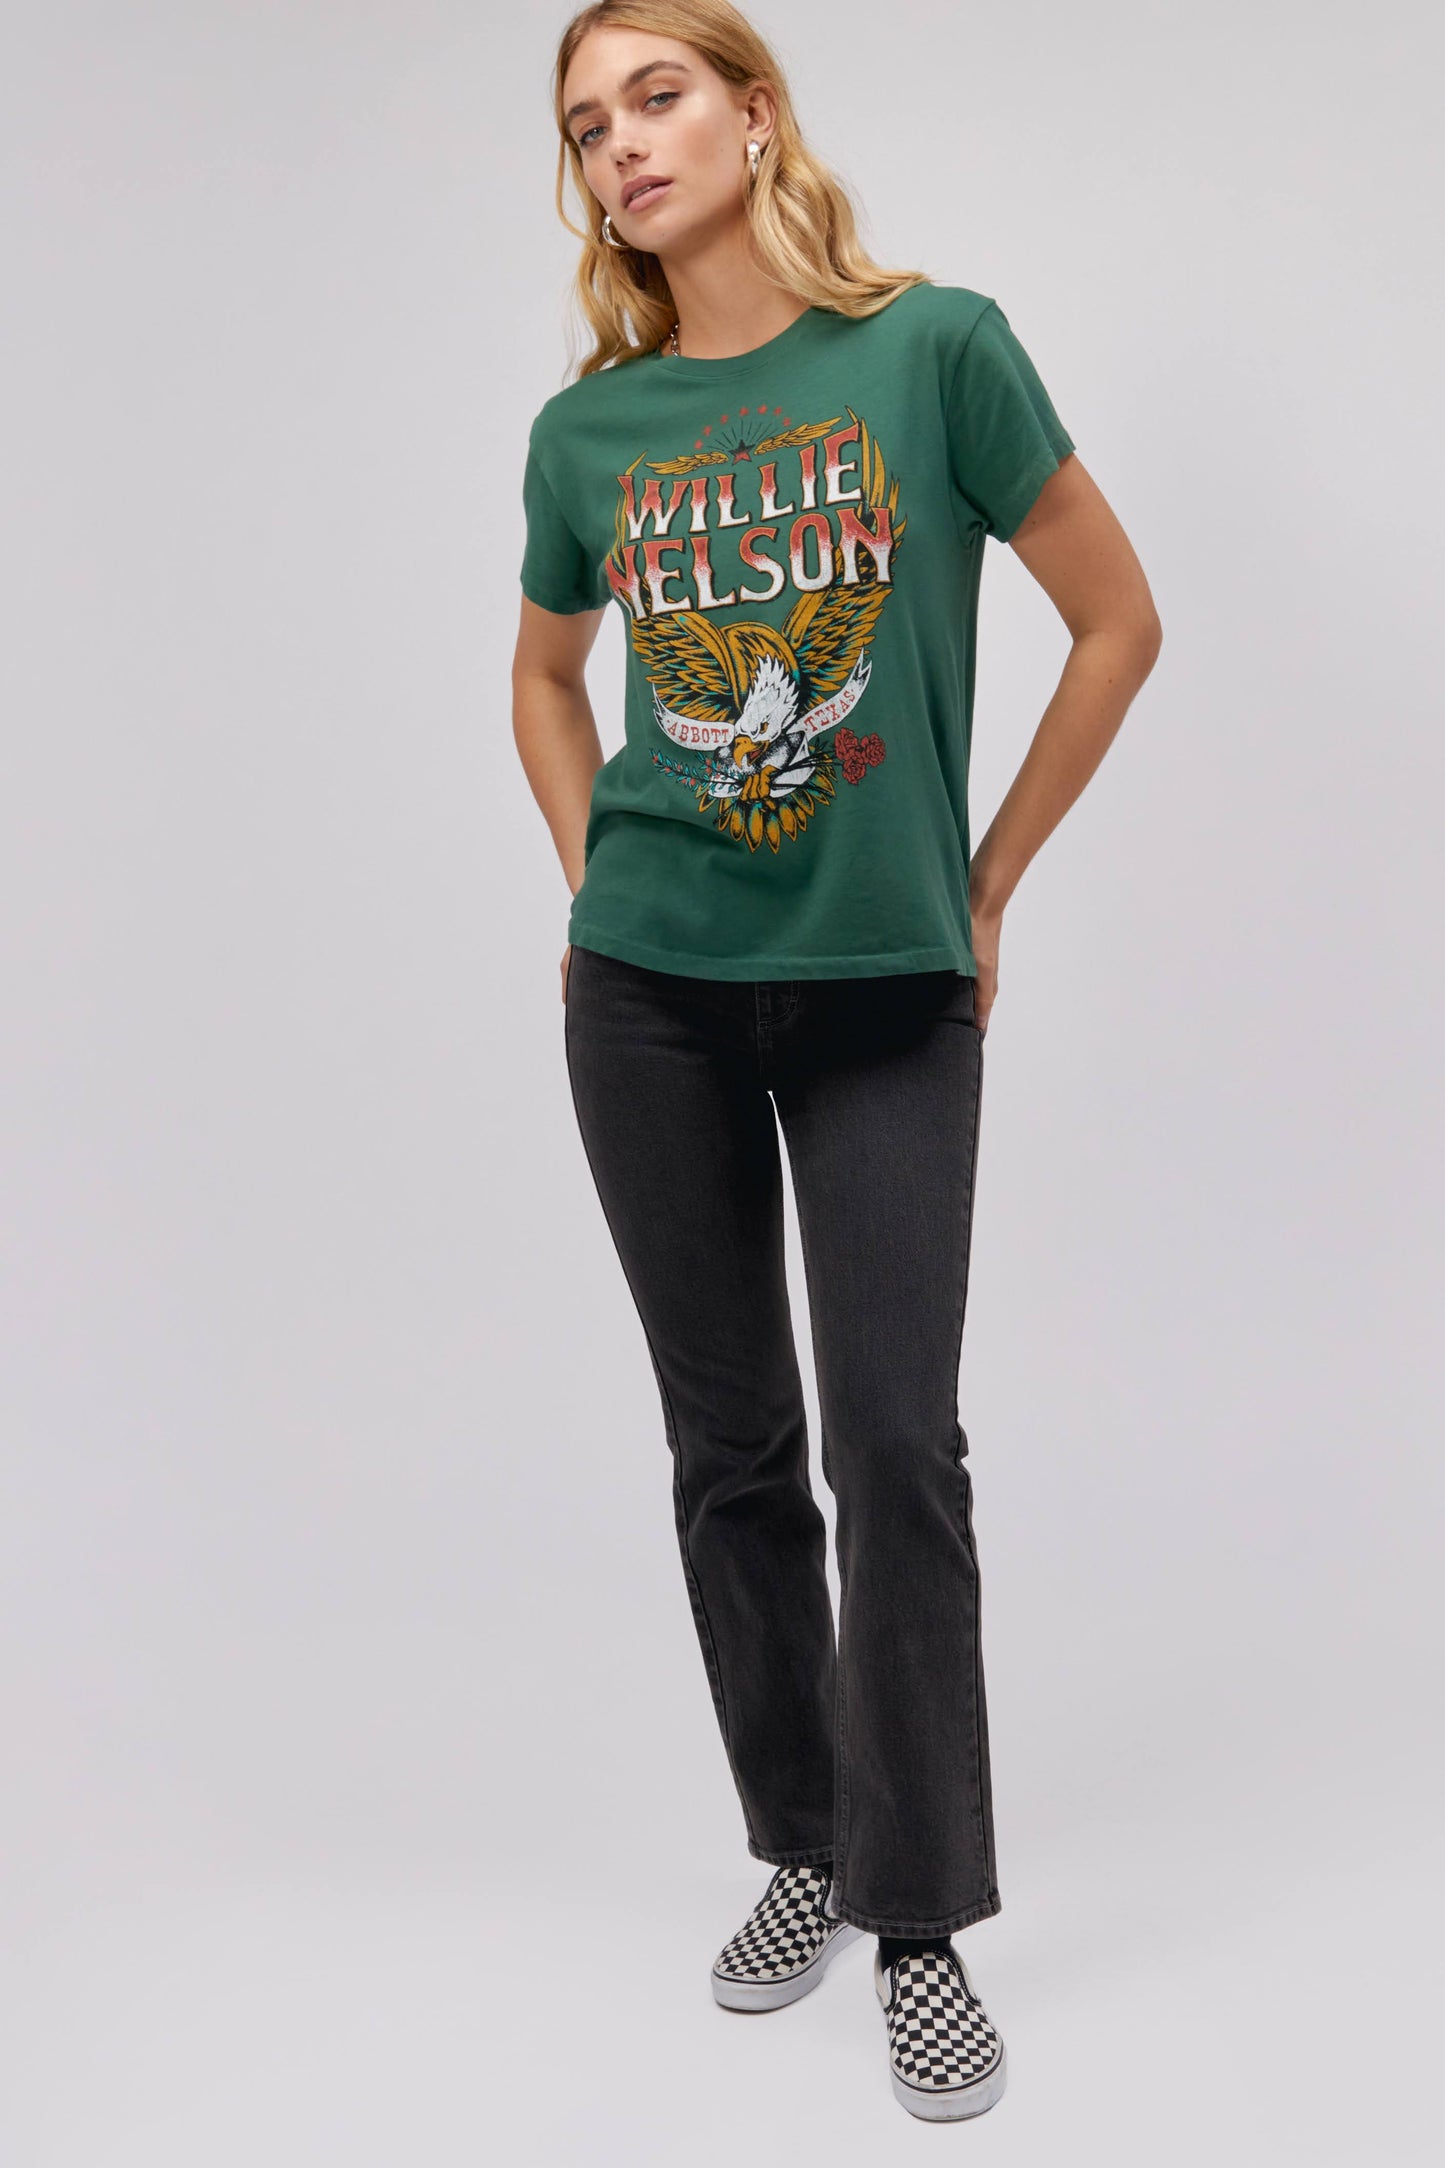 A blonde-haired model featuring a green tee stamped with 'Willie Nelson' and designed with a bird with 'Abott Texas' on its mouth.